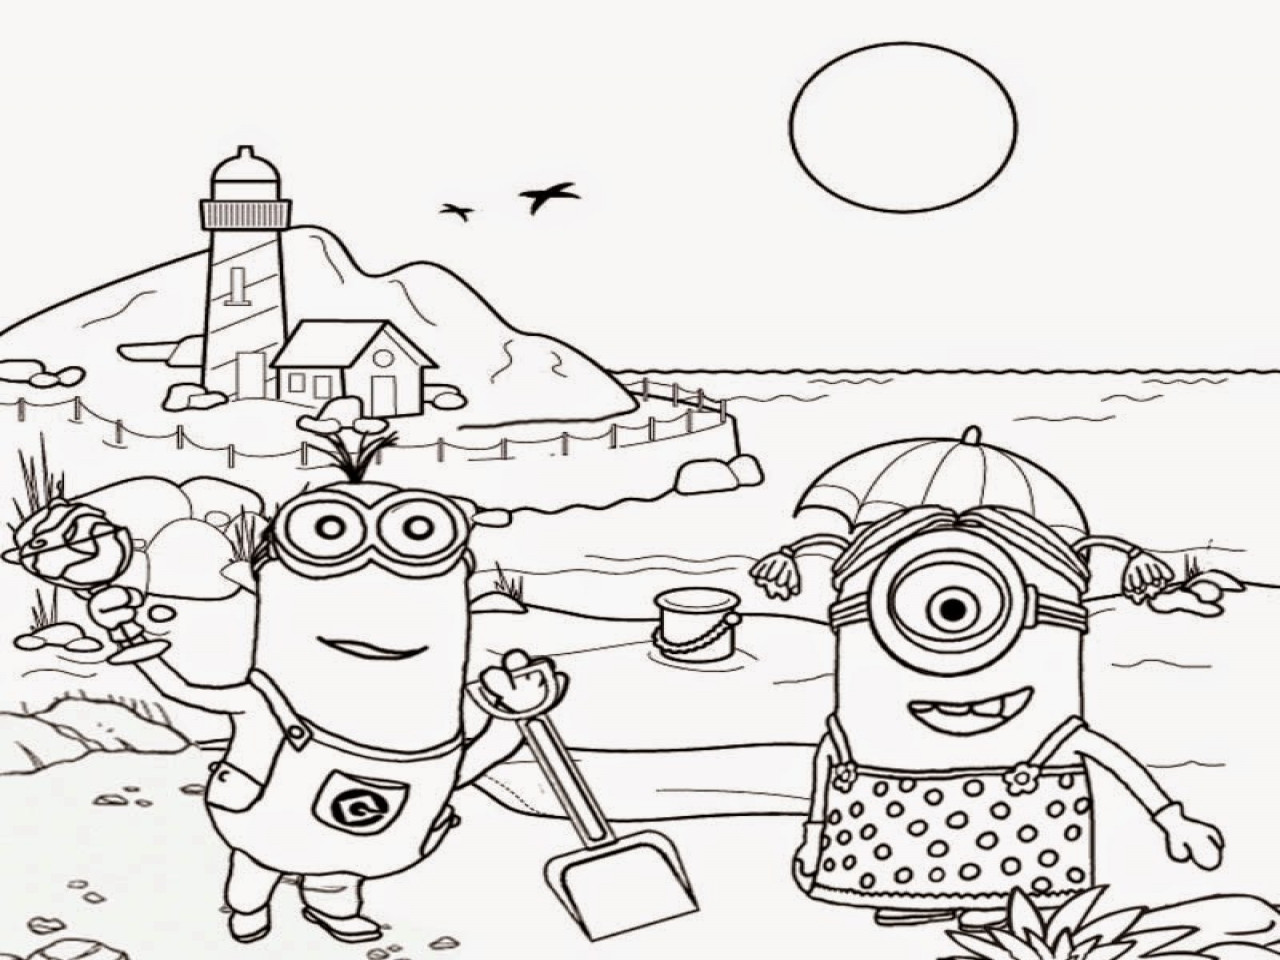 Beach Coloring Pages For Teens
 Teen Beach Movie Coloring Pages Minion grig3